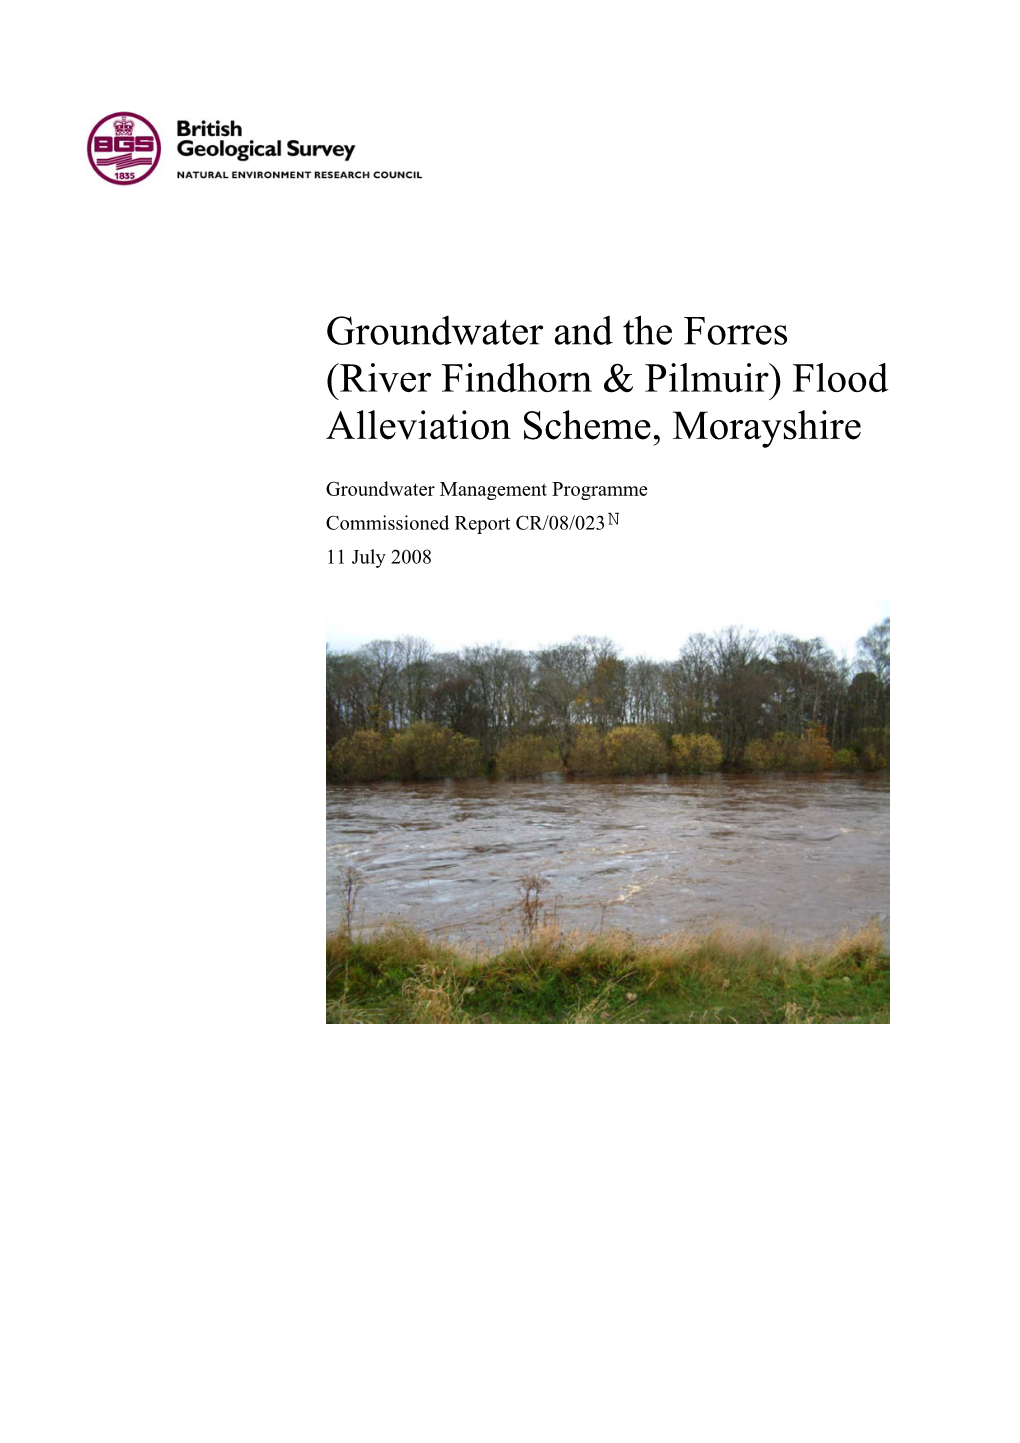 Groundwater and the Forres (River Findhorn & Pilmuir)